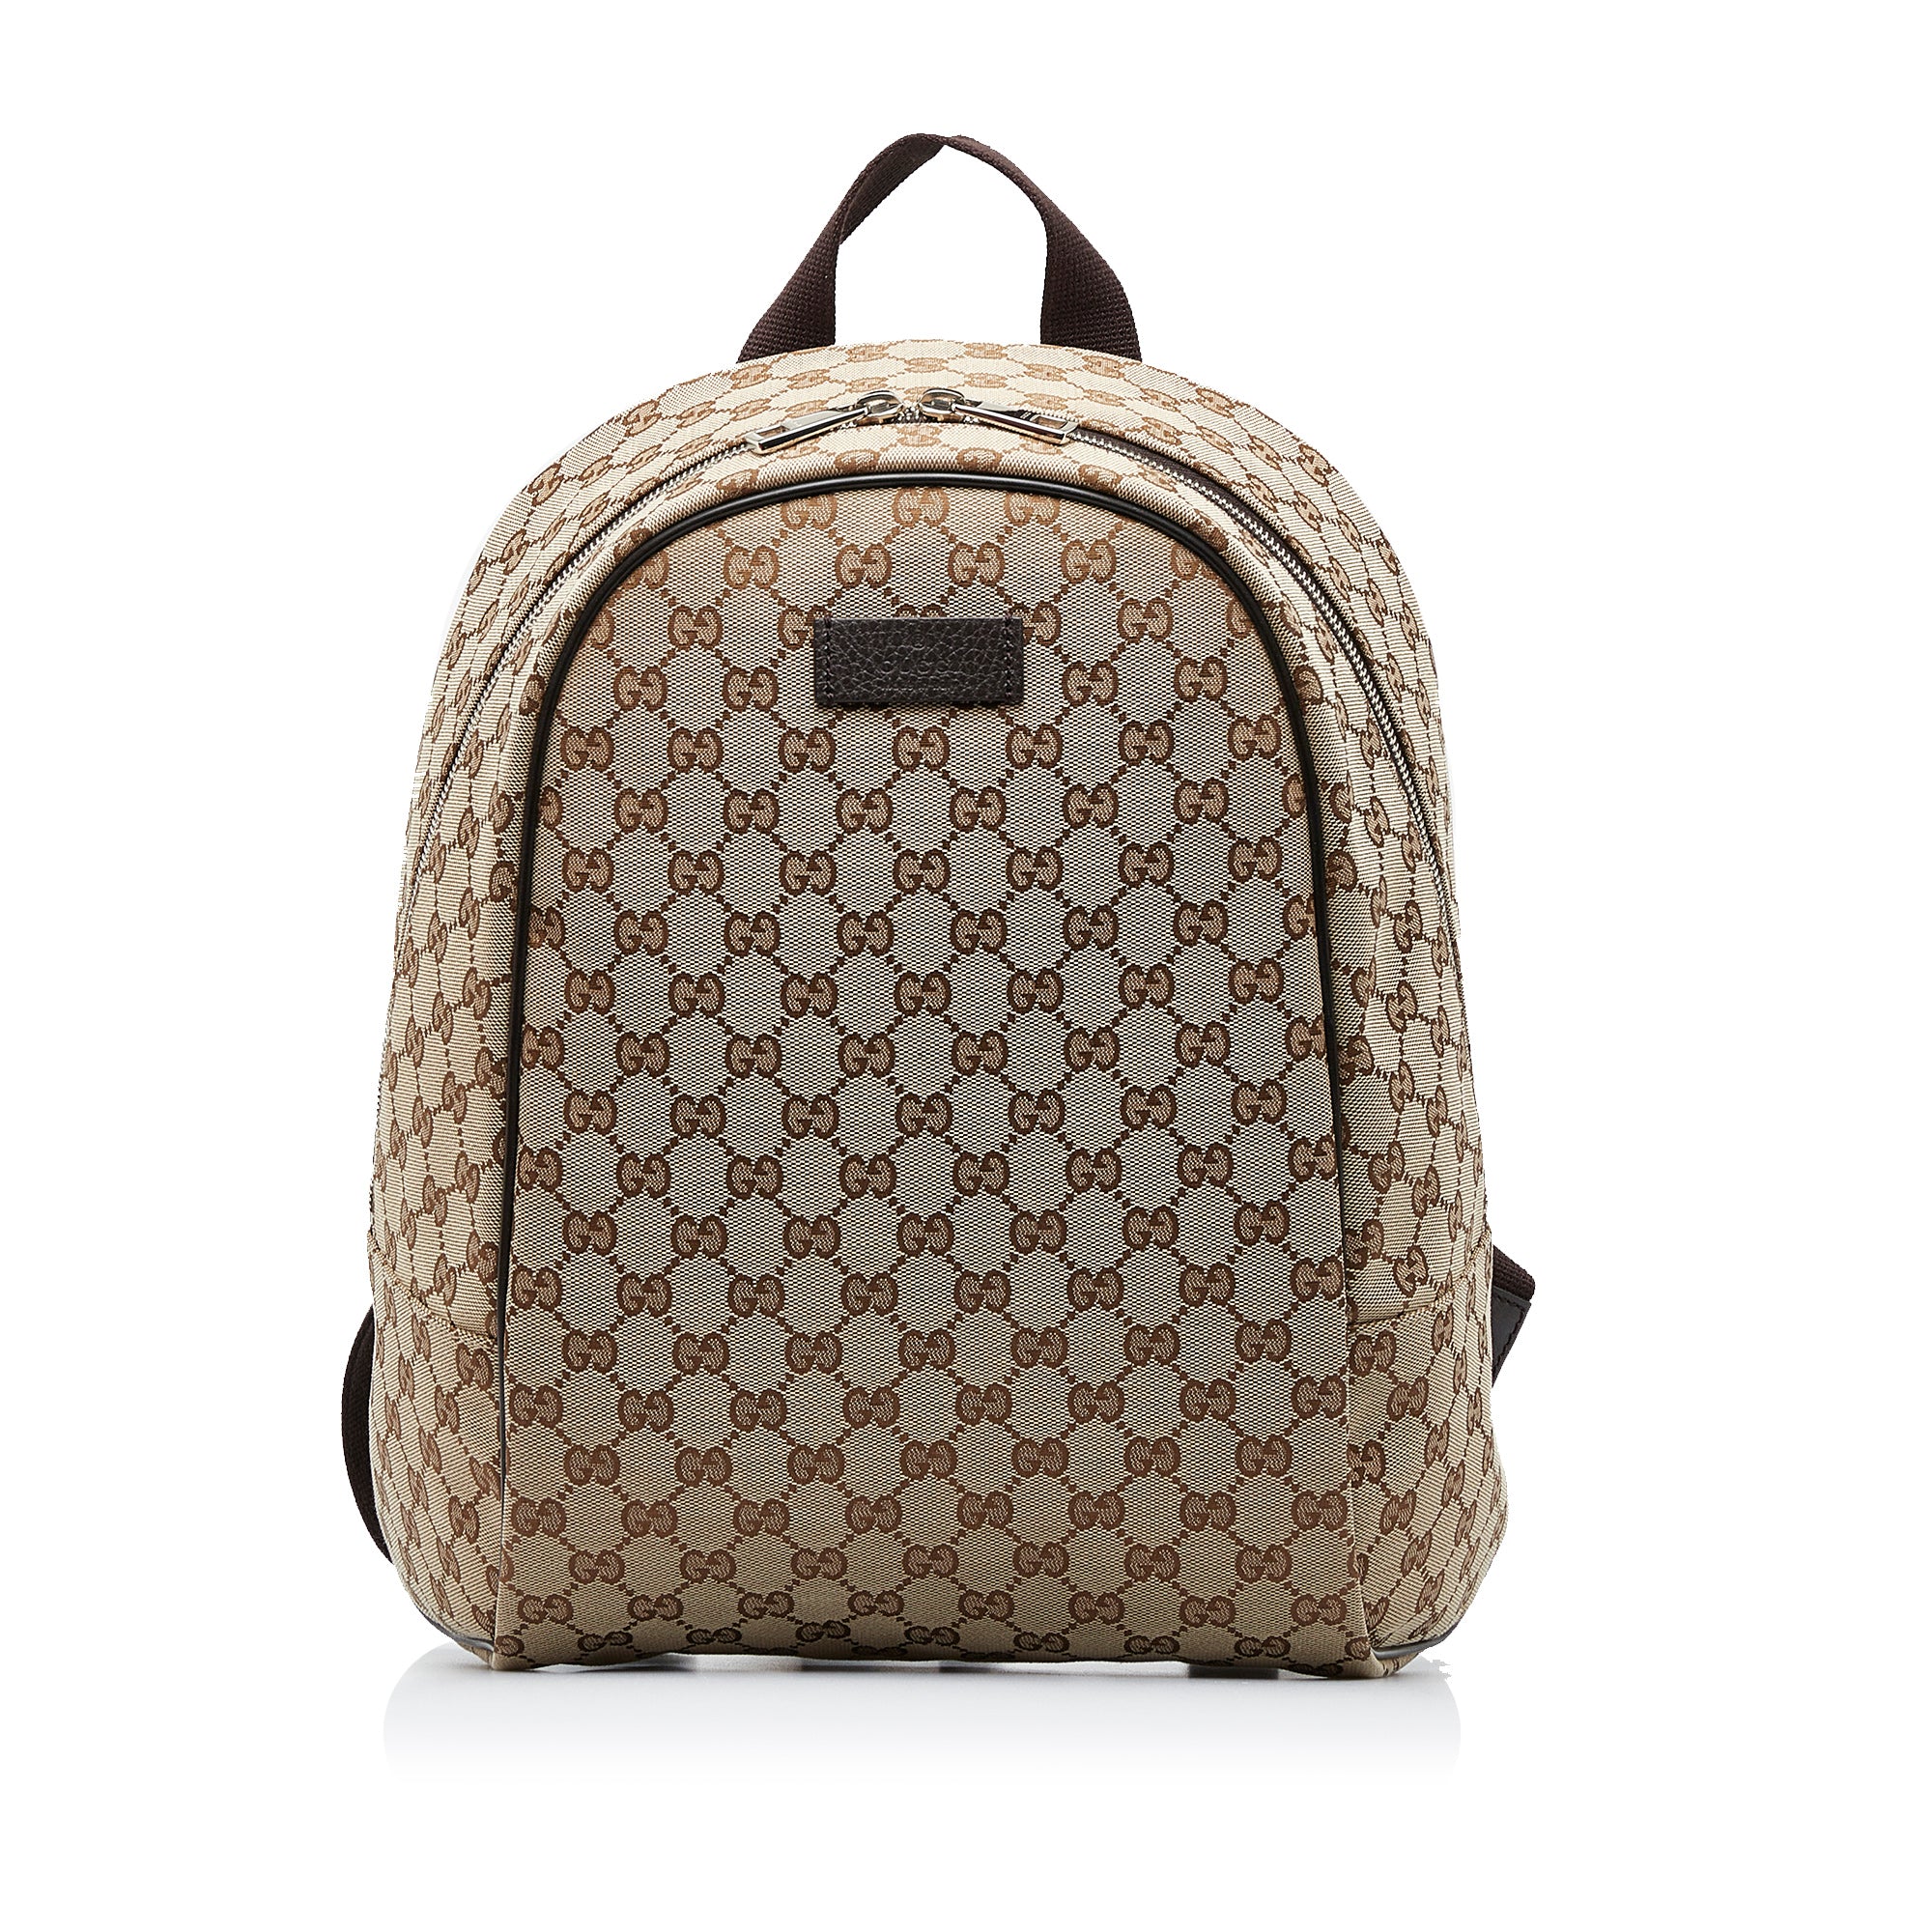 GG Large backpack in grey - Gucci | Mytheresa